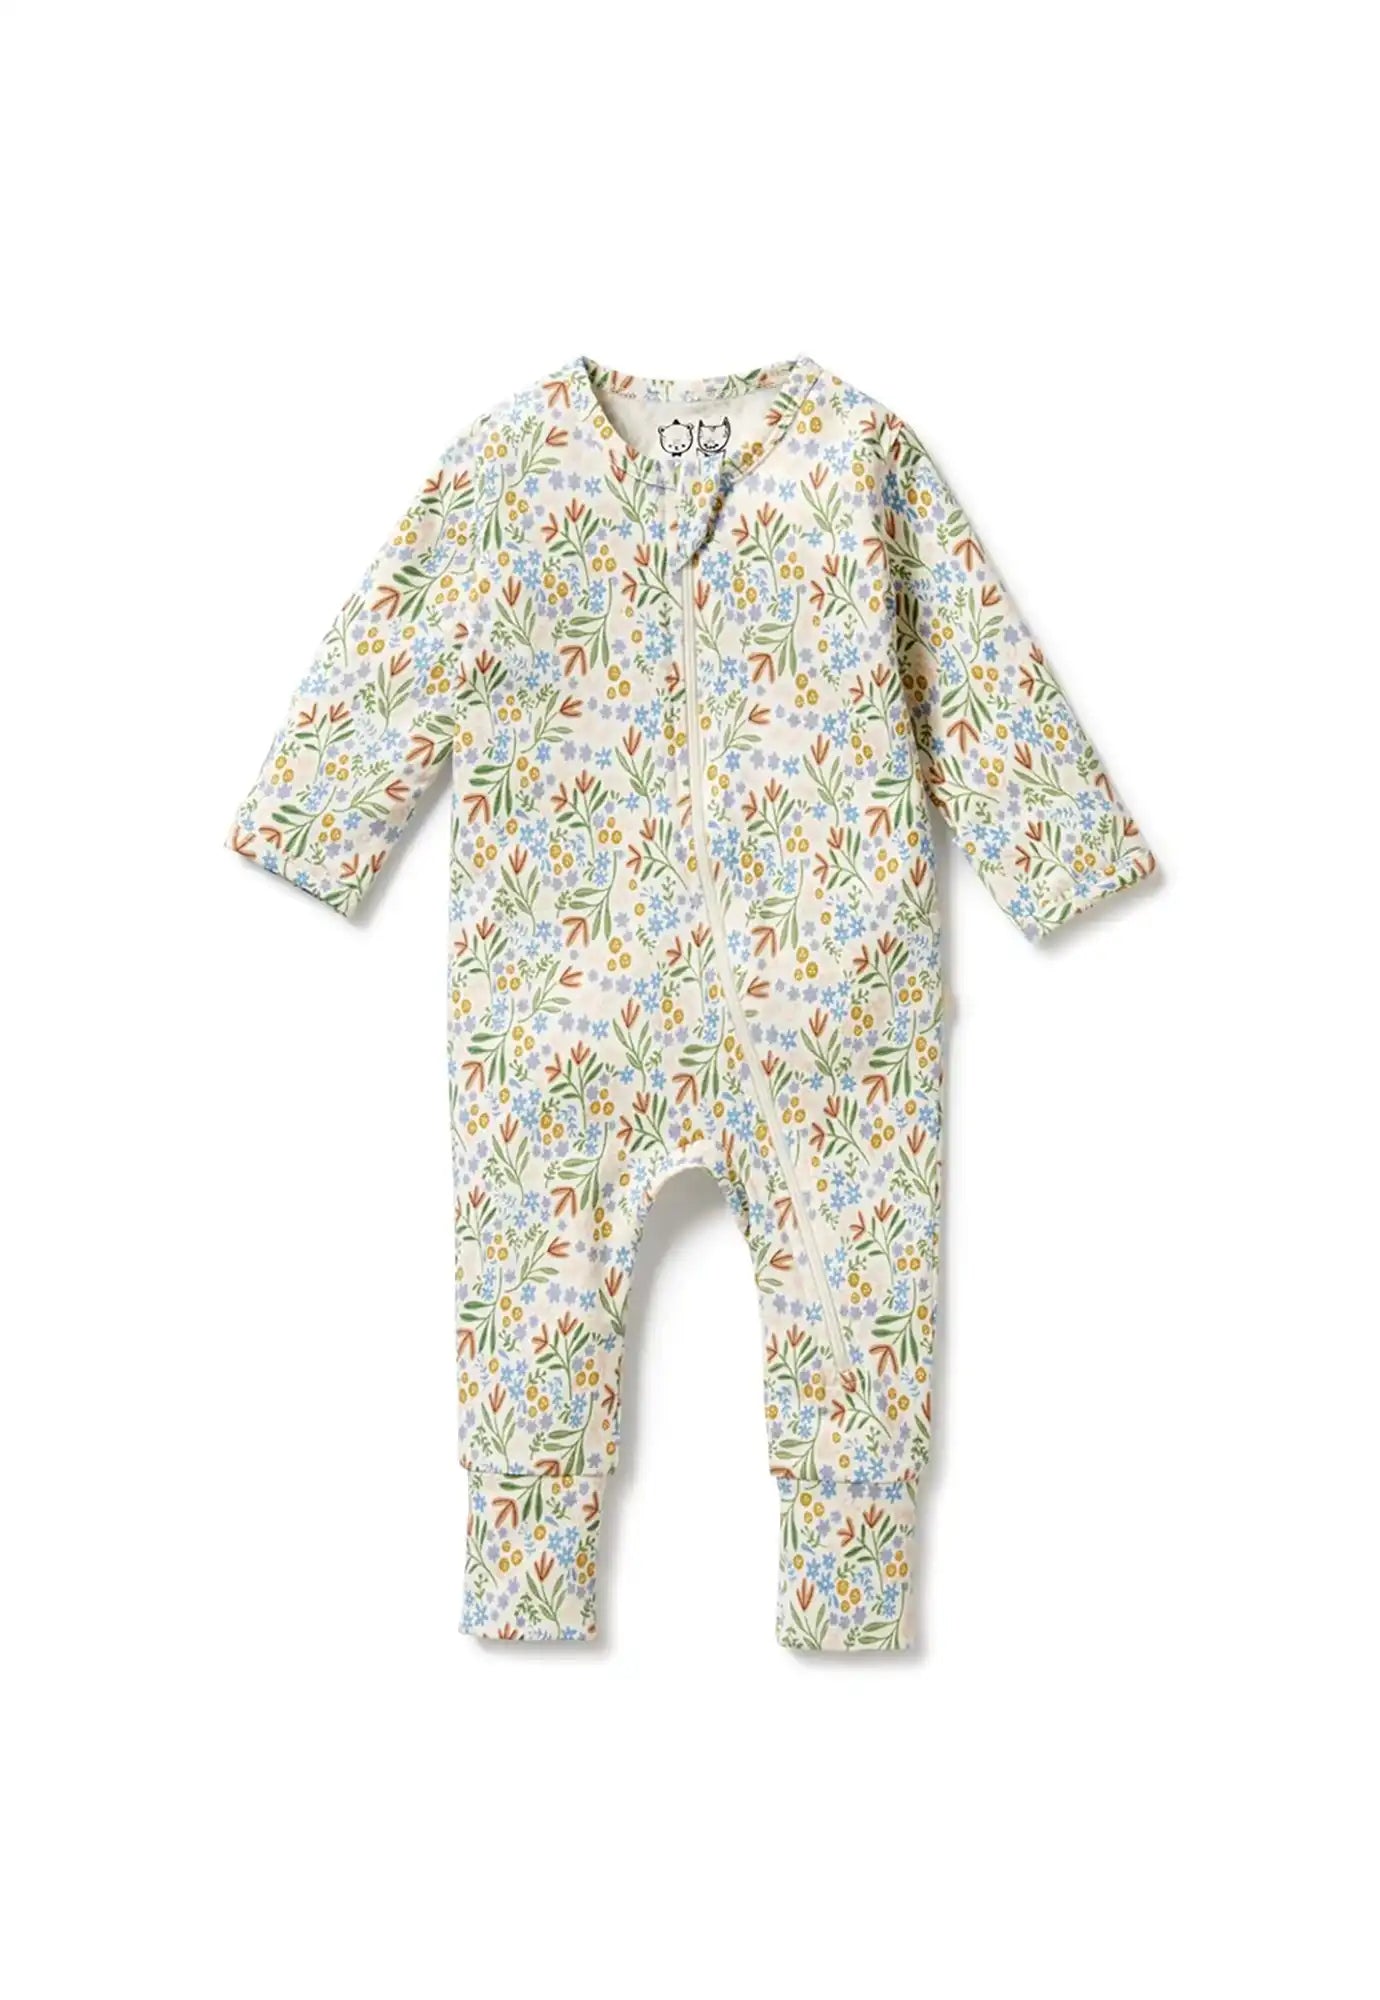 wilson & frenchy - zipsuit w feet - tinker floral